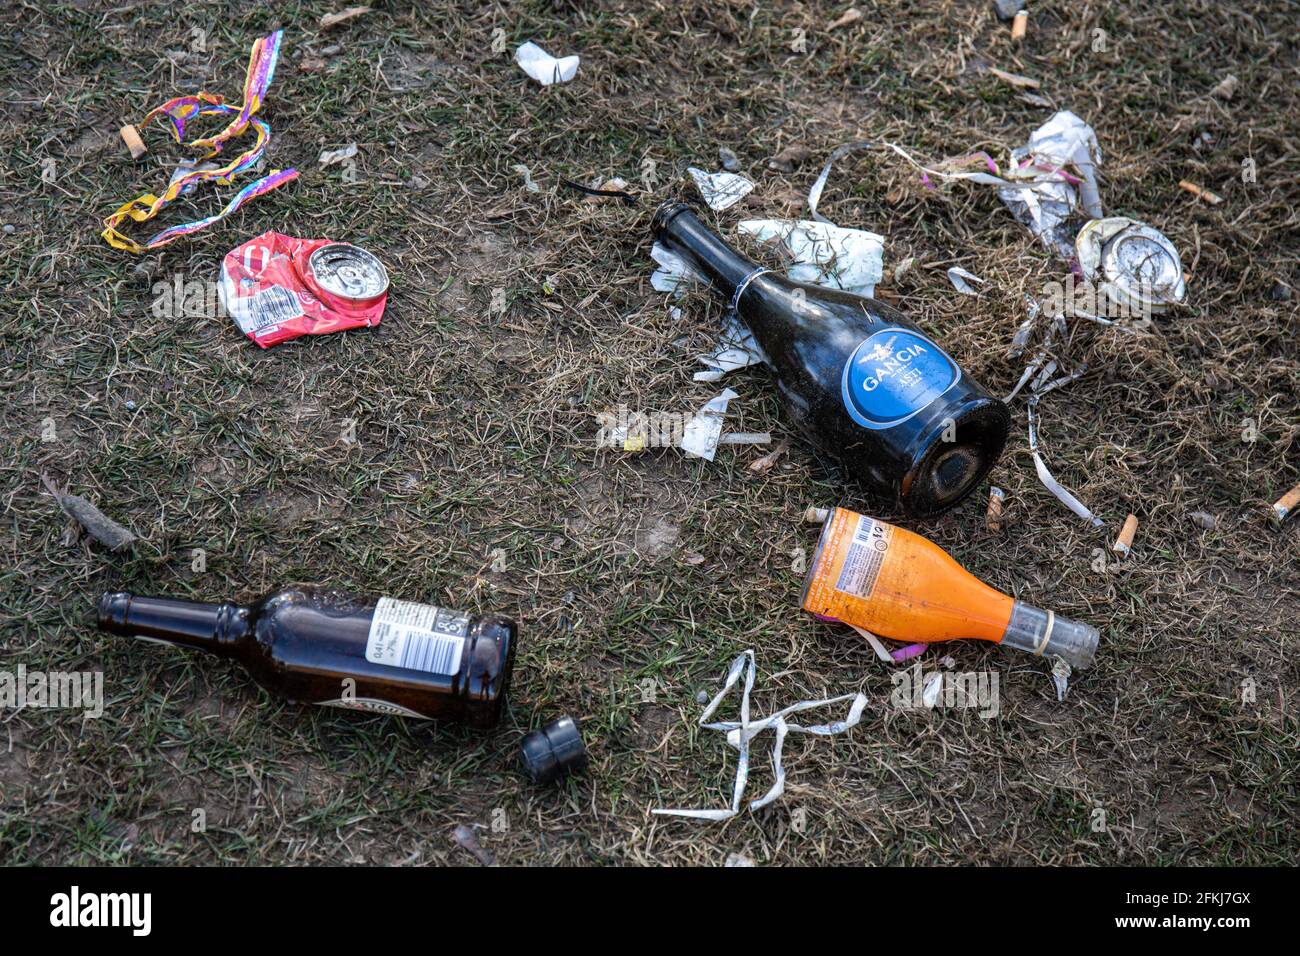 Empty bottles of sparkling wine on the ground with other litter after May Day Eve celebrations Stock Photo